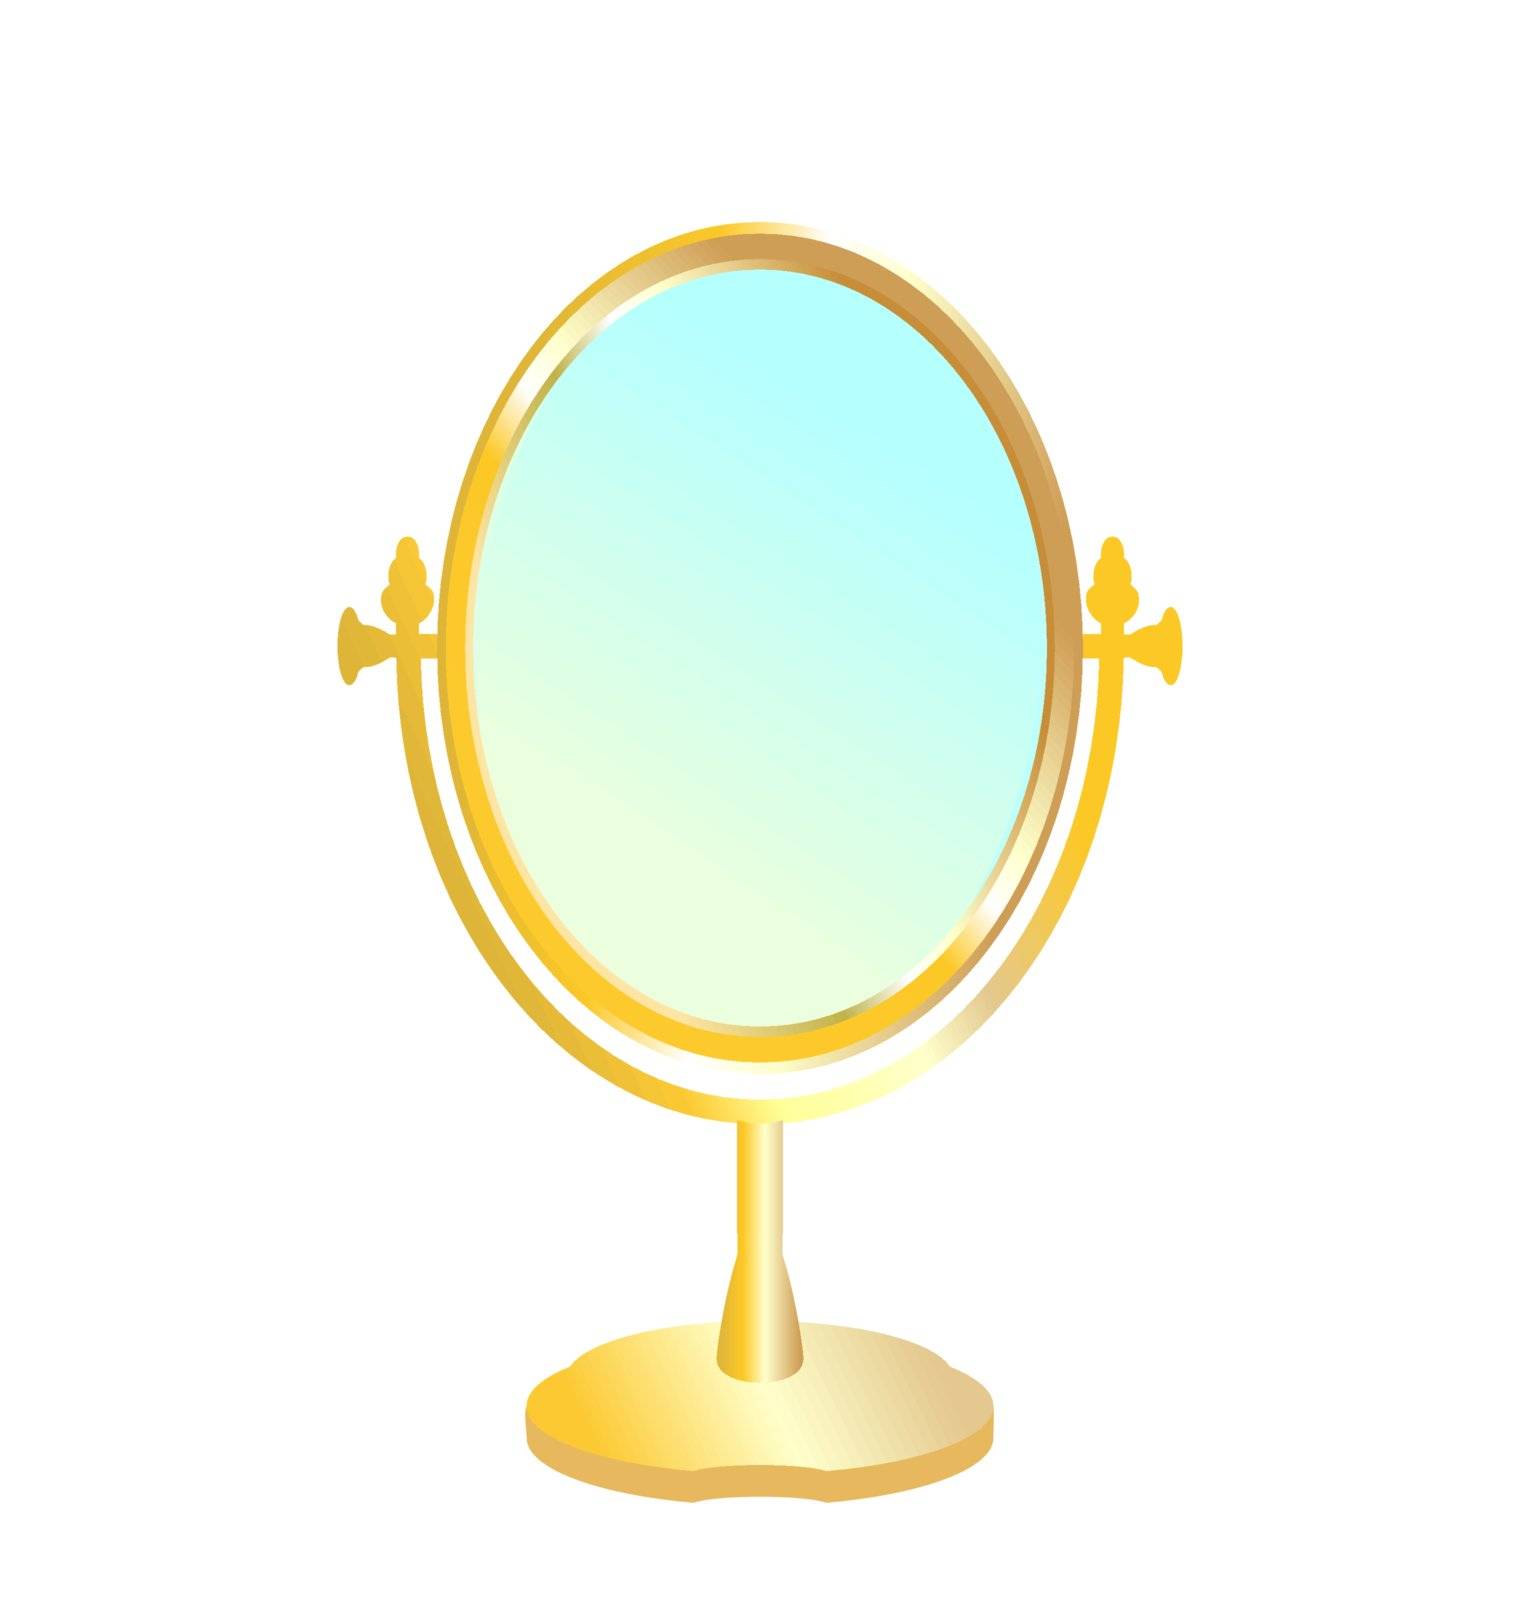 Realistic illustration of gold mirror by smeagorl